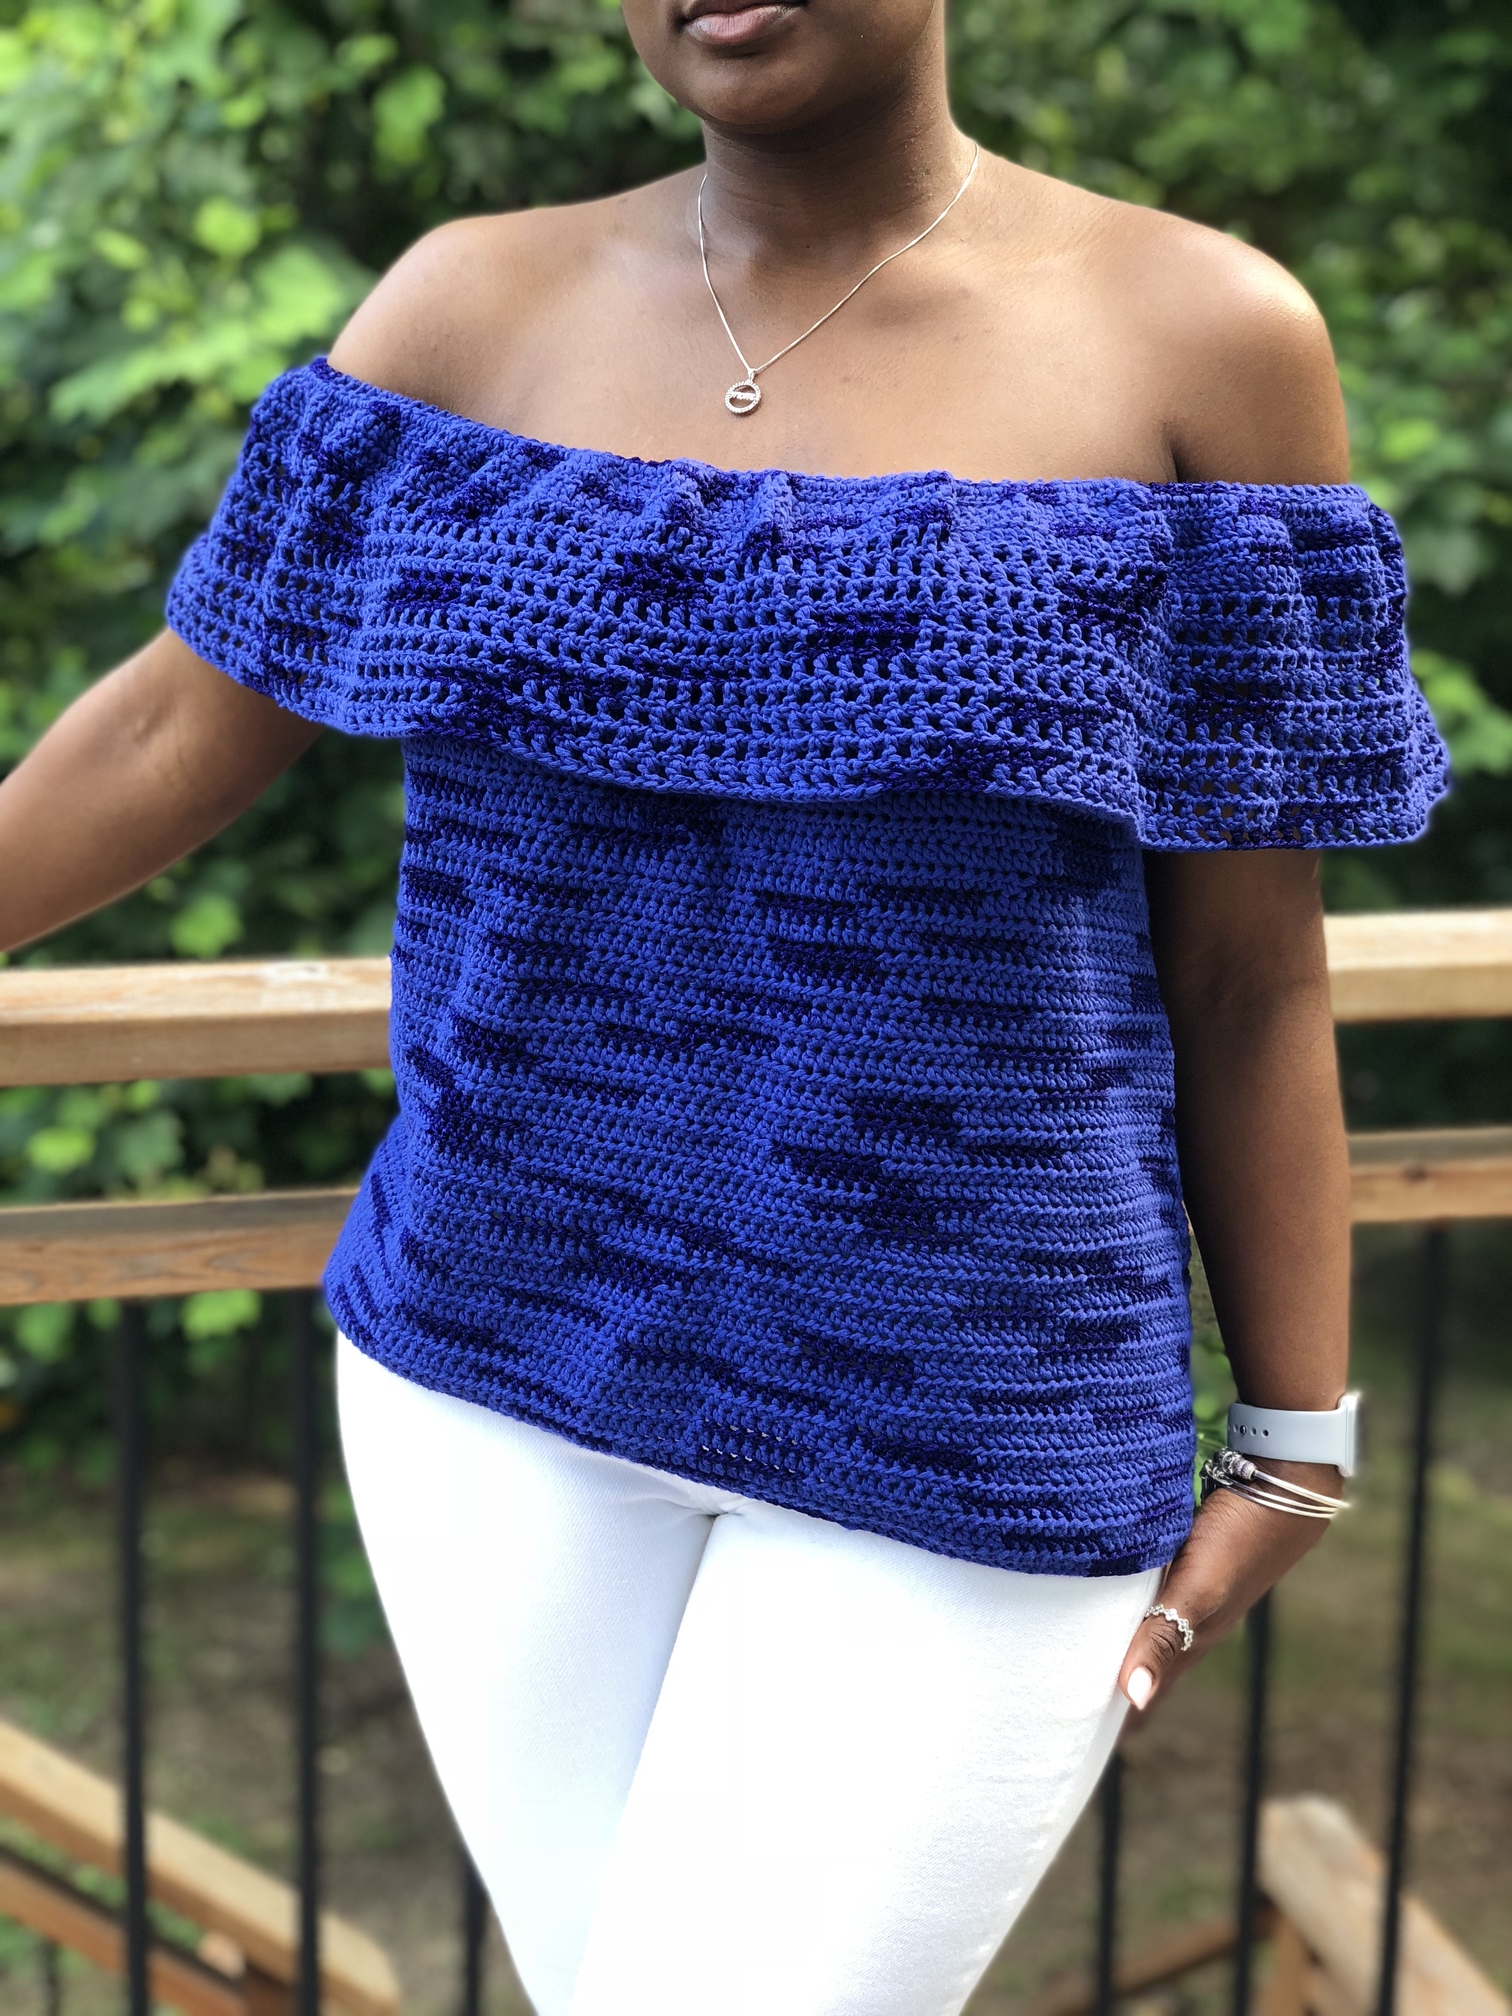 Sea of Summer Top, an easy crochet pattern that shows off your style and the yarn